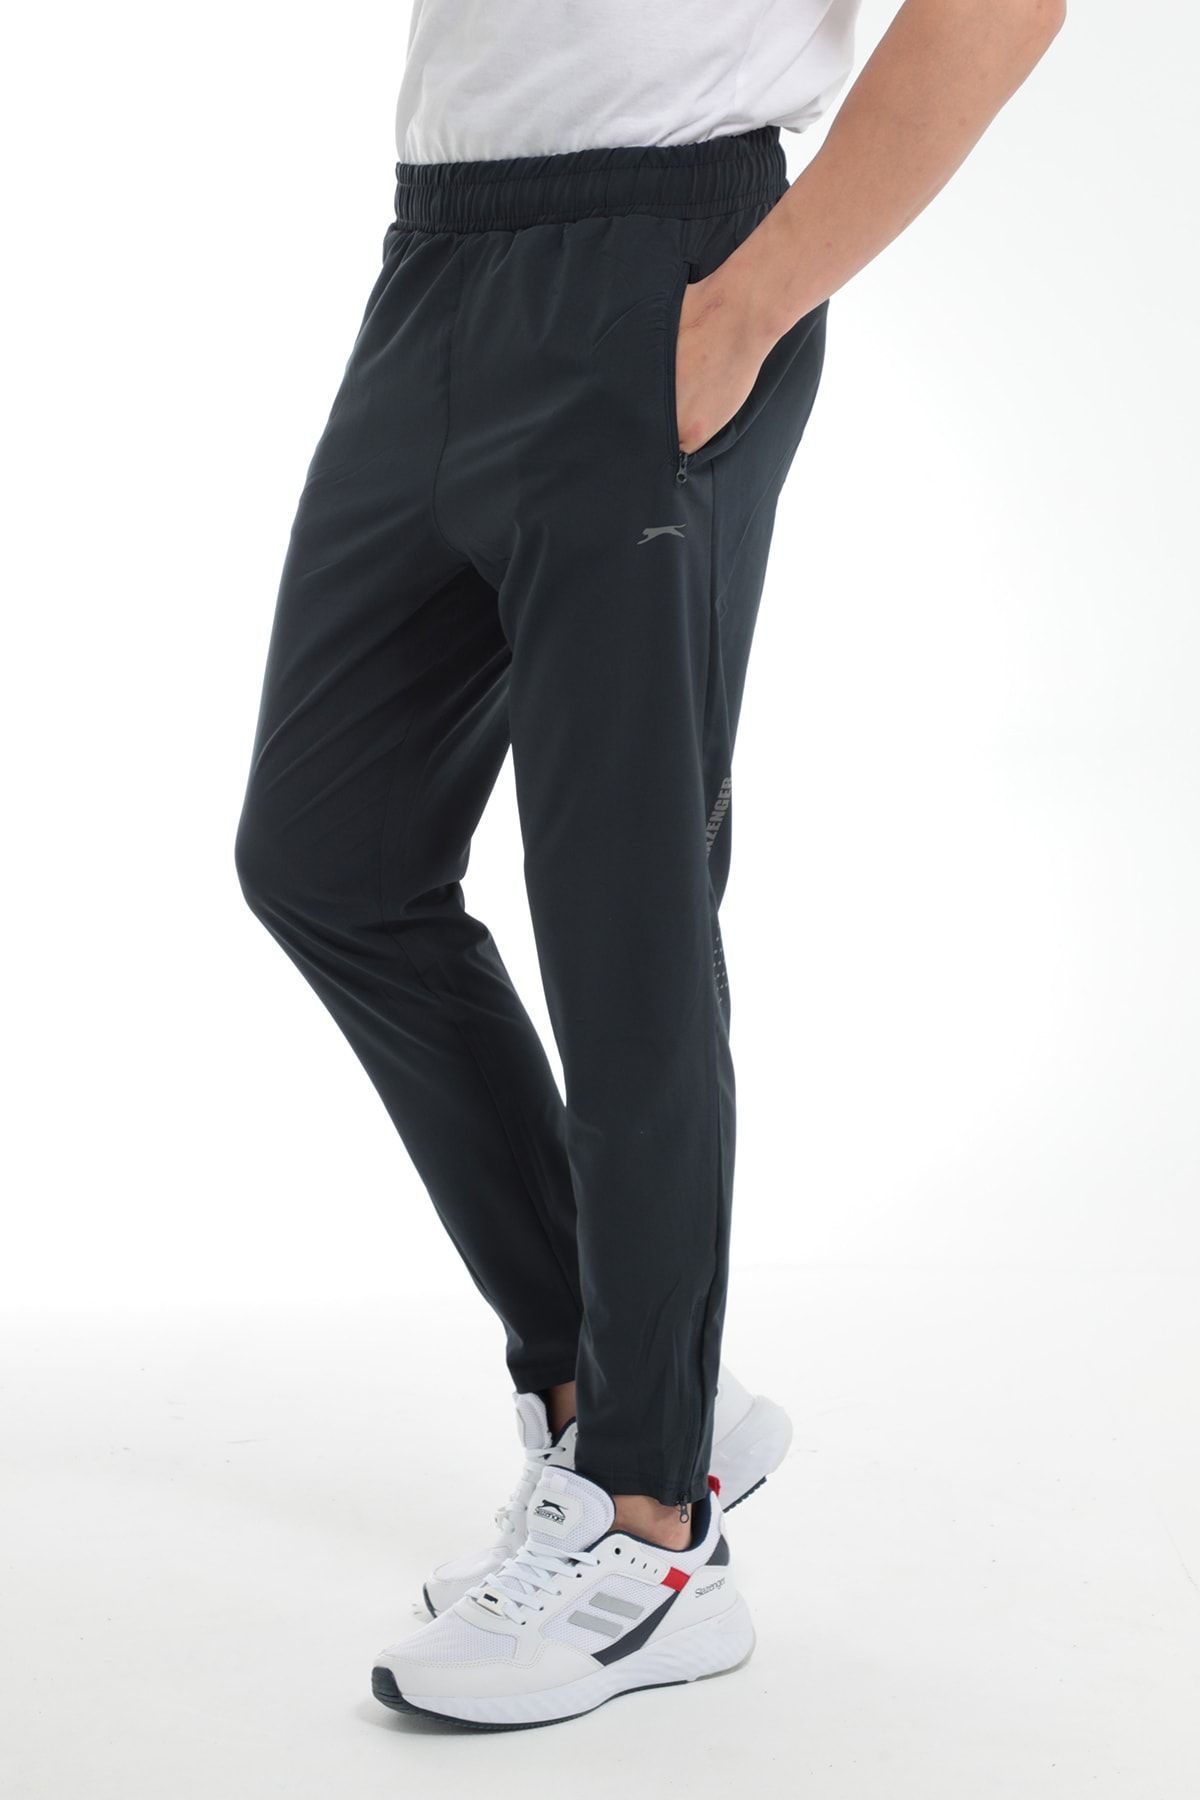 Buy performax track pants in India @ Limeroad | page 2